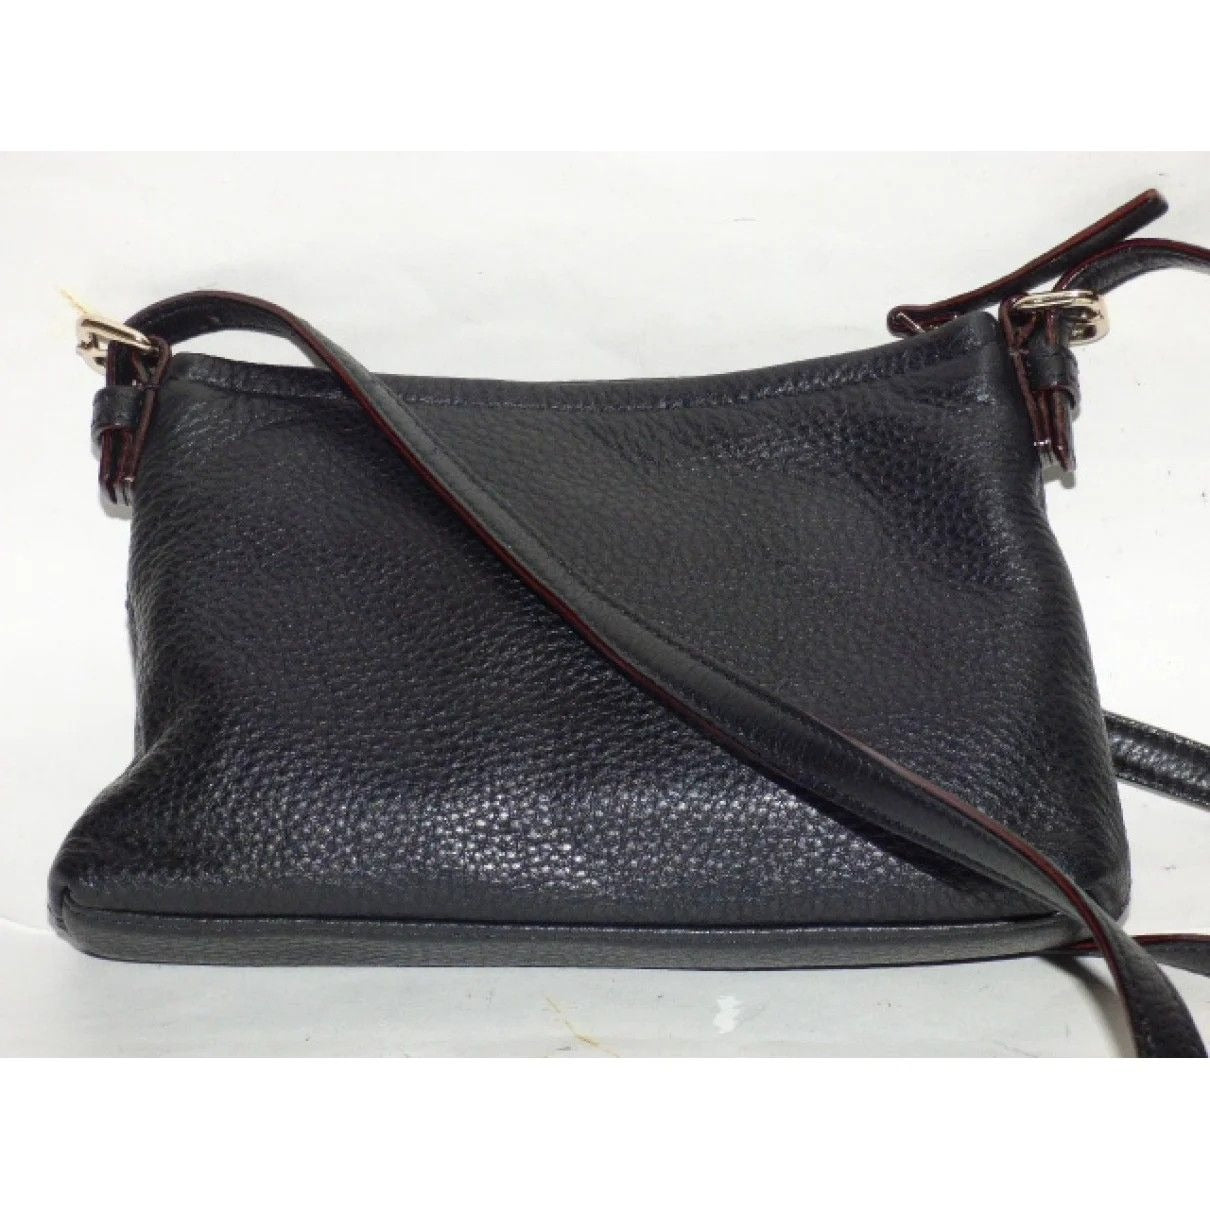 Kate Spade, classic, buttery soft black leather, rectangular, shoulder or cross body purse with top zip pocket and gold accents